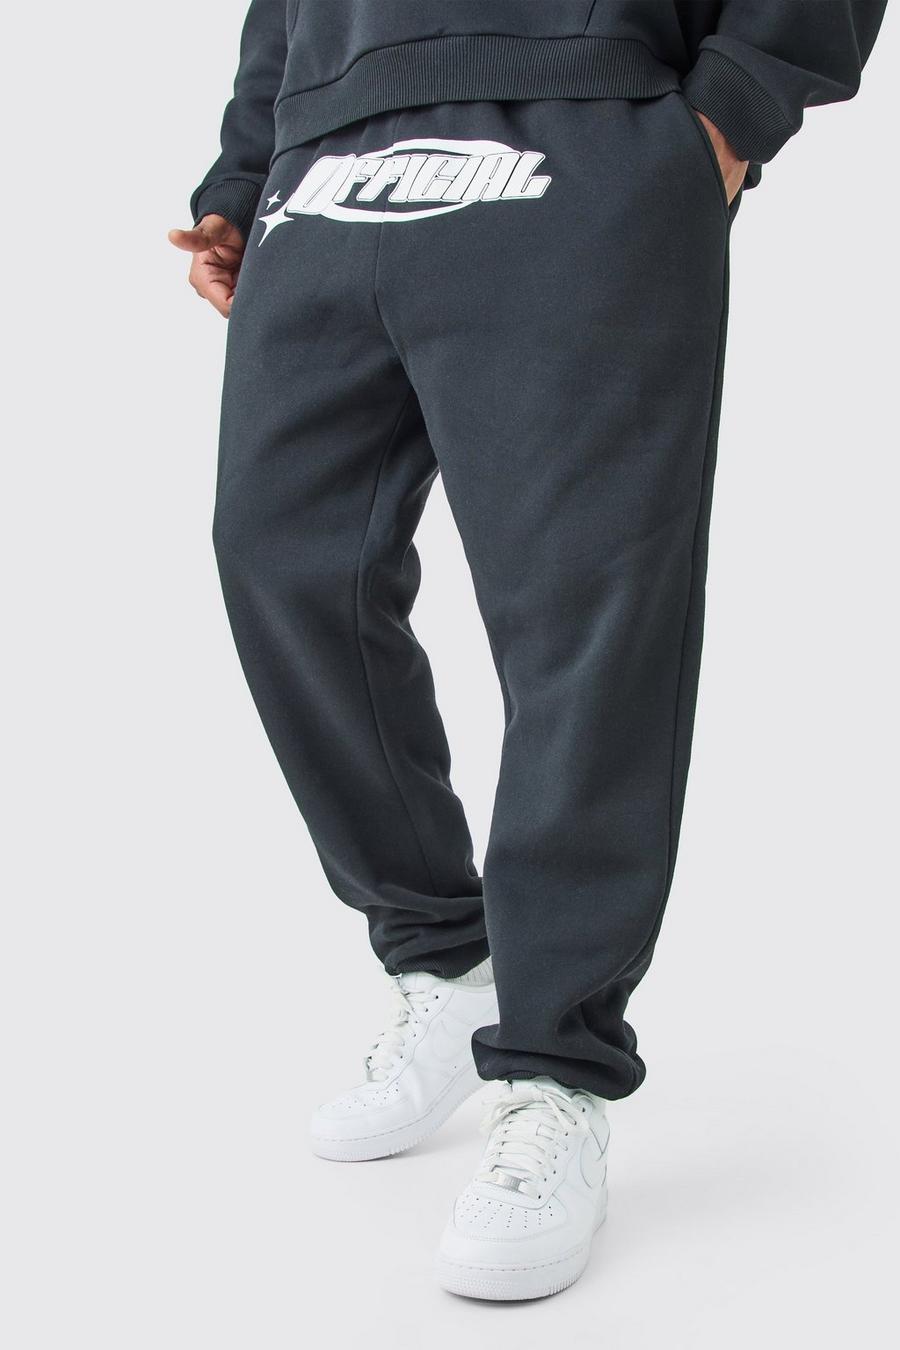 Jogging homme grand taille - Videos